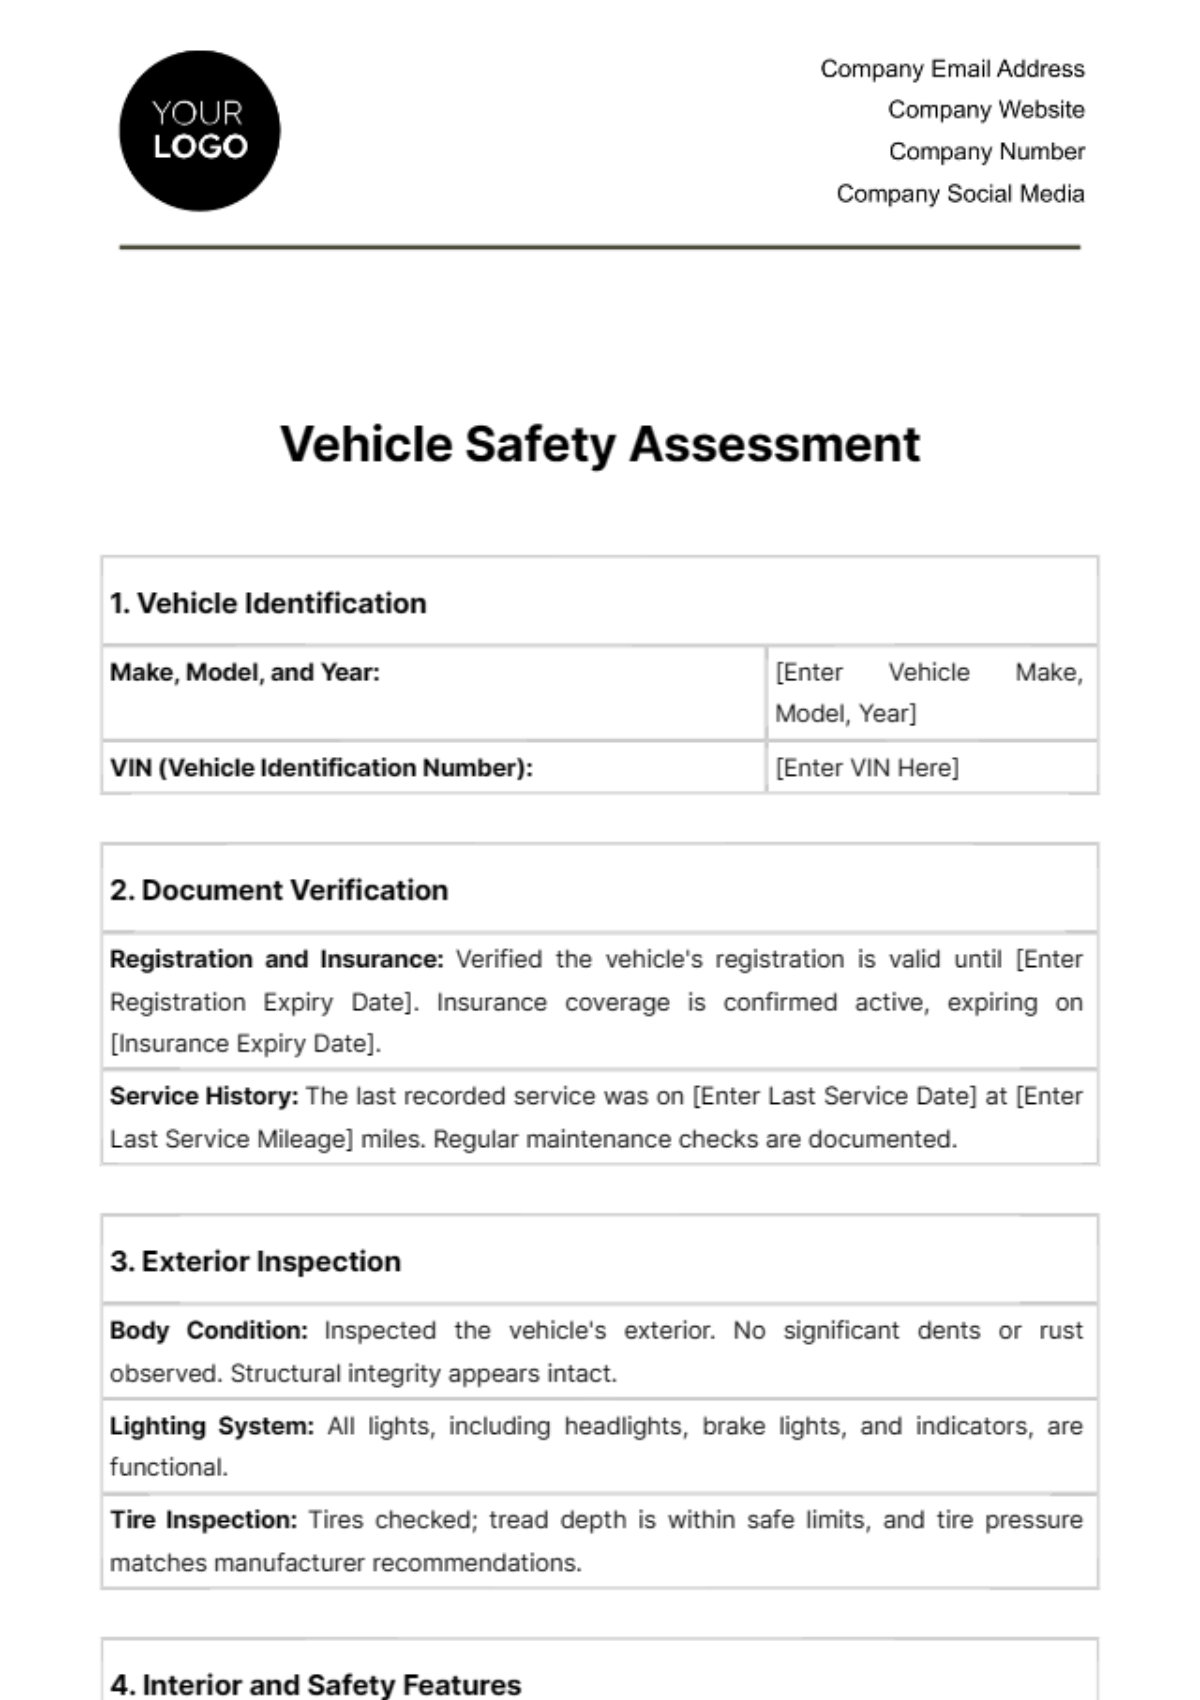 Vehicle Safety Assessment Template